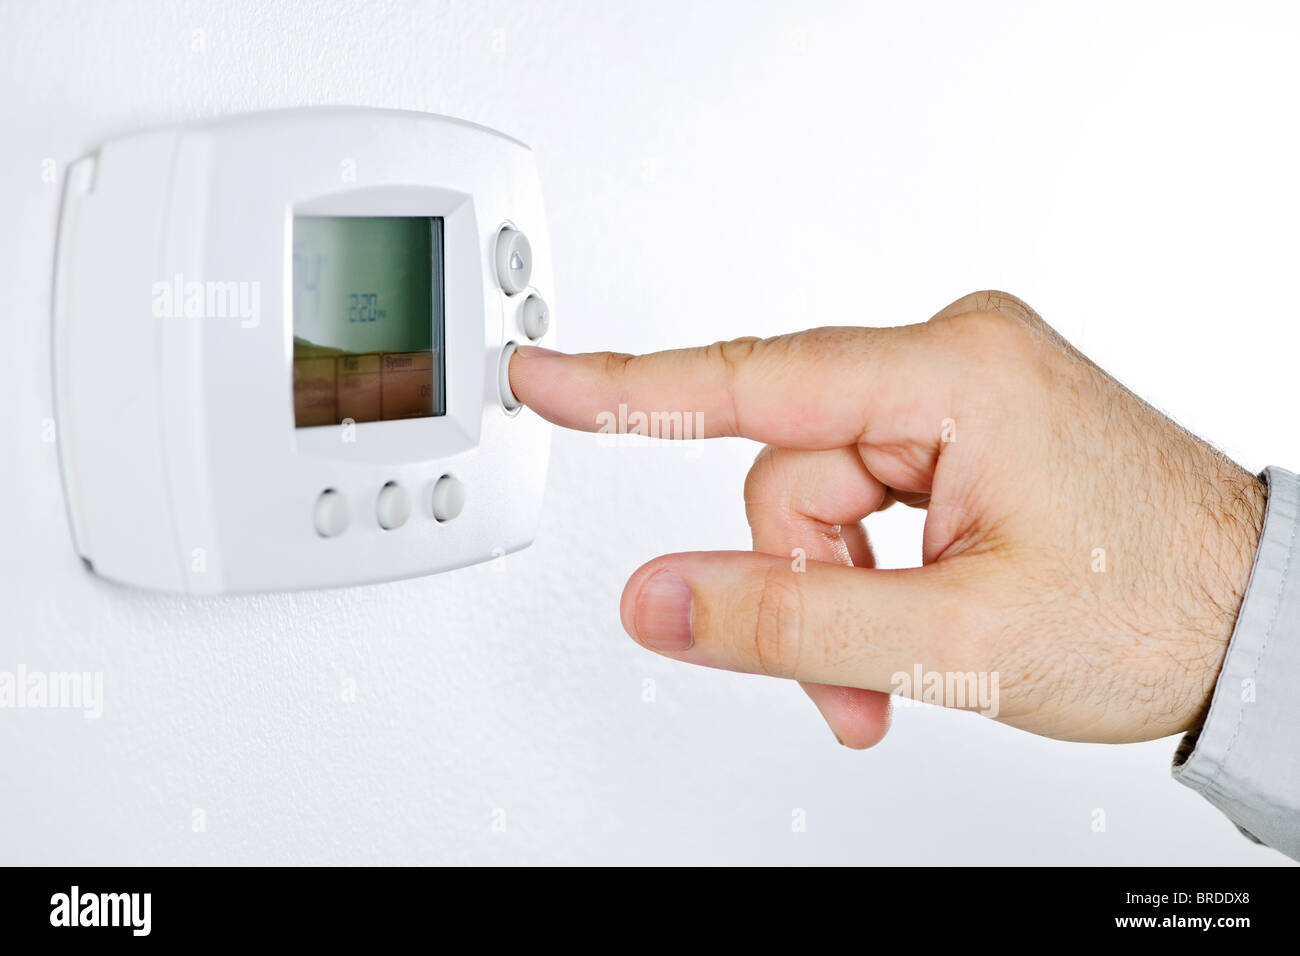 Closeup of hand pressing button on digital thermostat Stock Photo